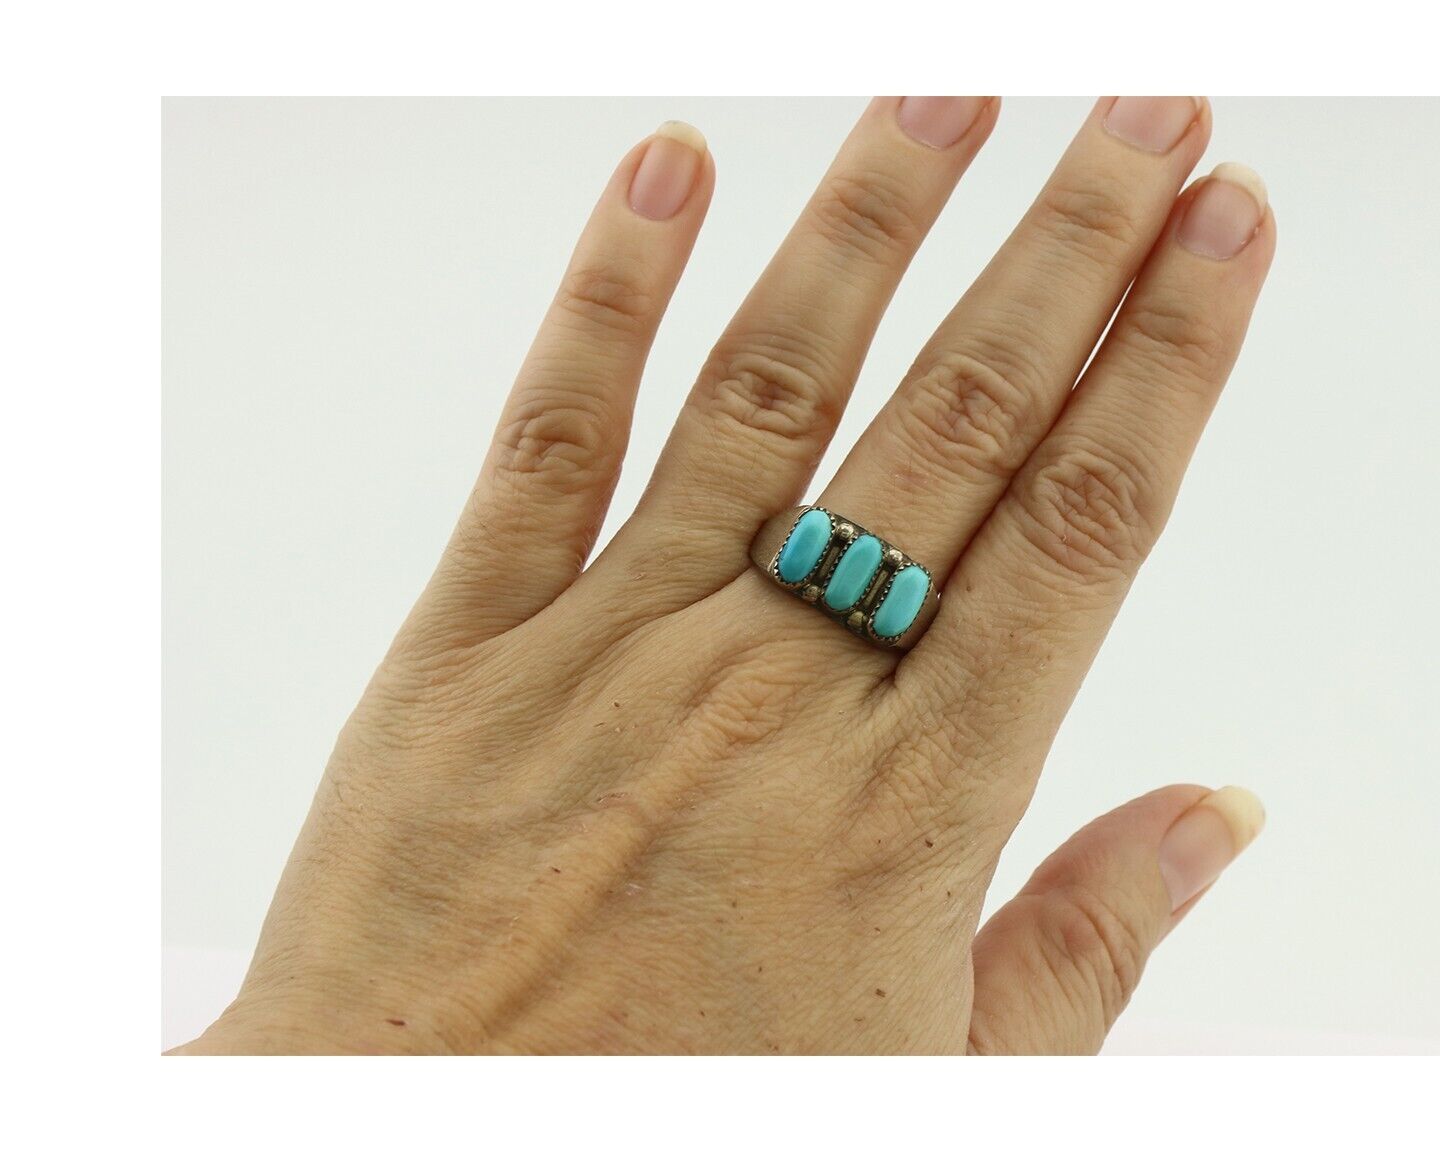 Zuni Ring .925 Silver Natural Sleeping Beauty Turquoise Signed R. LULE C.80's